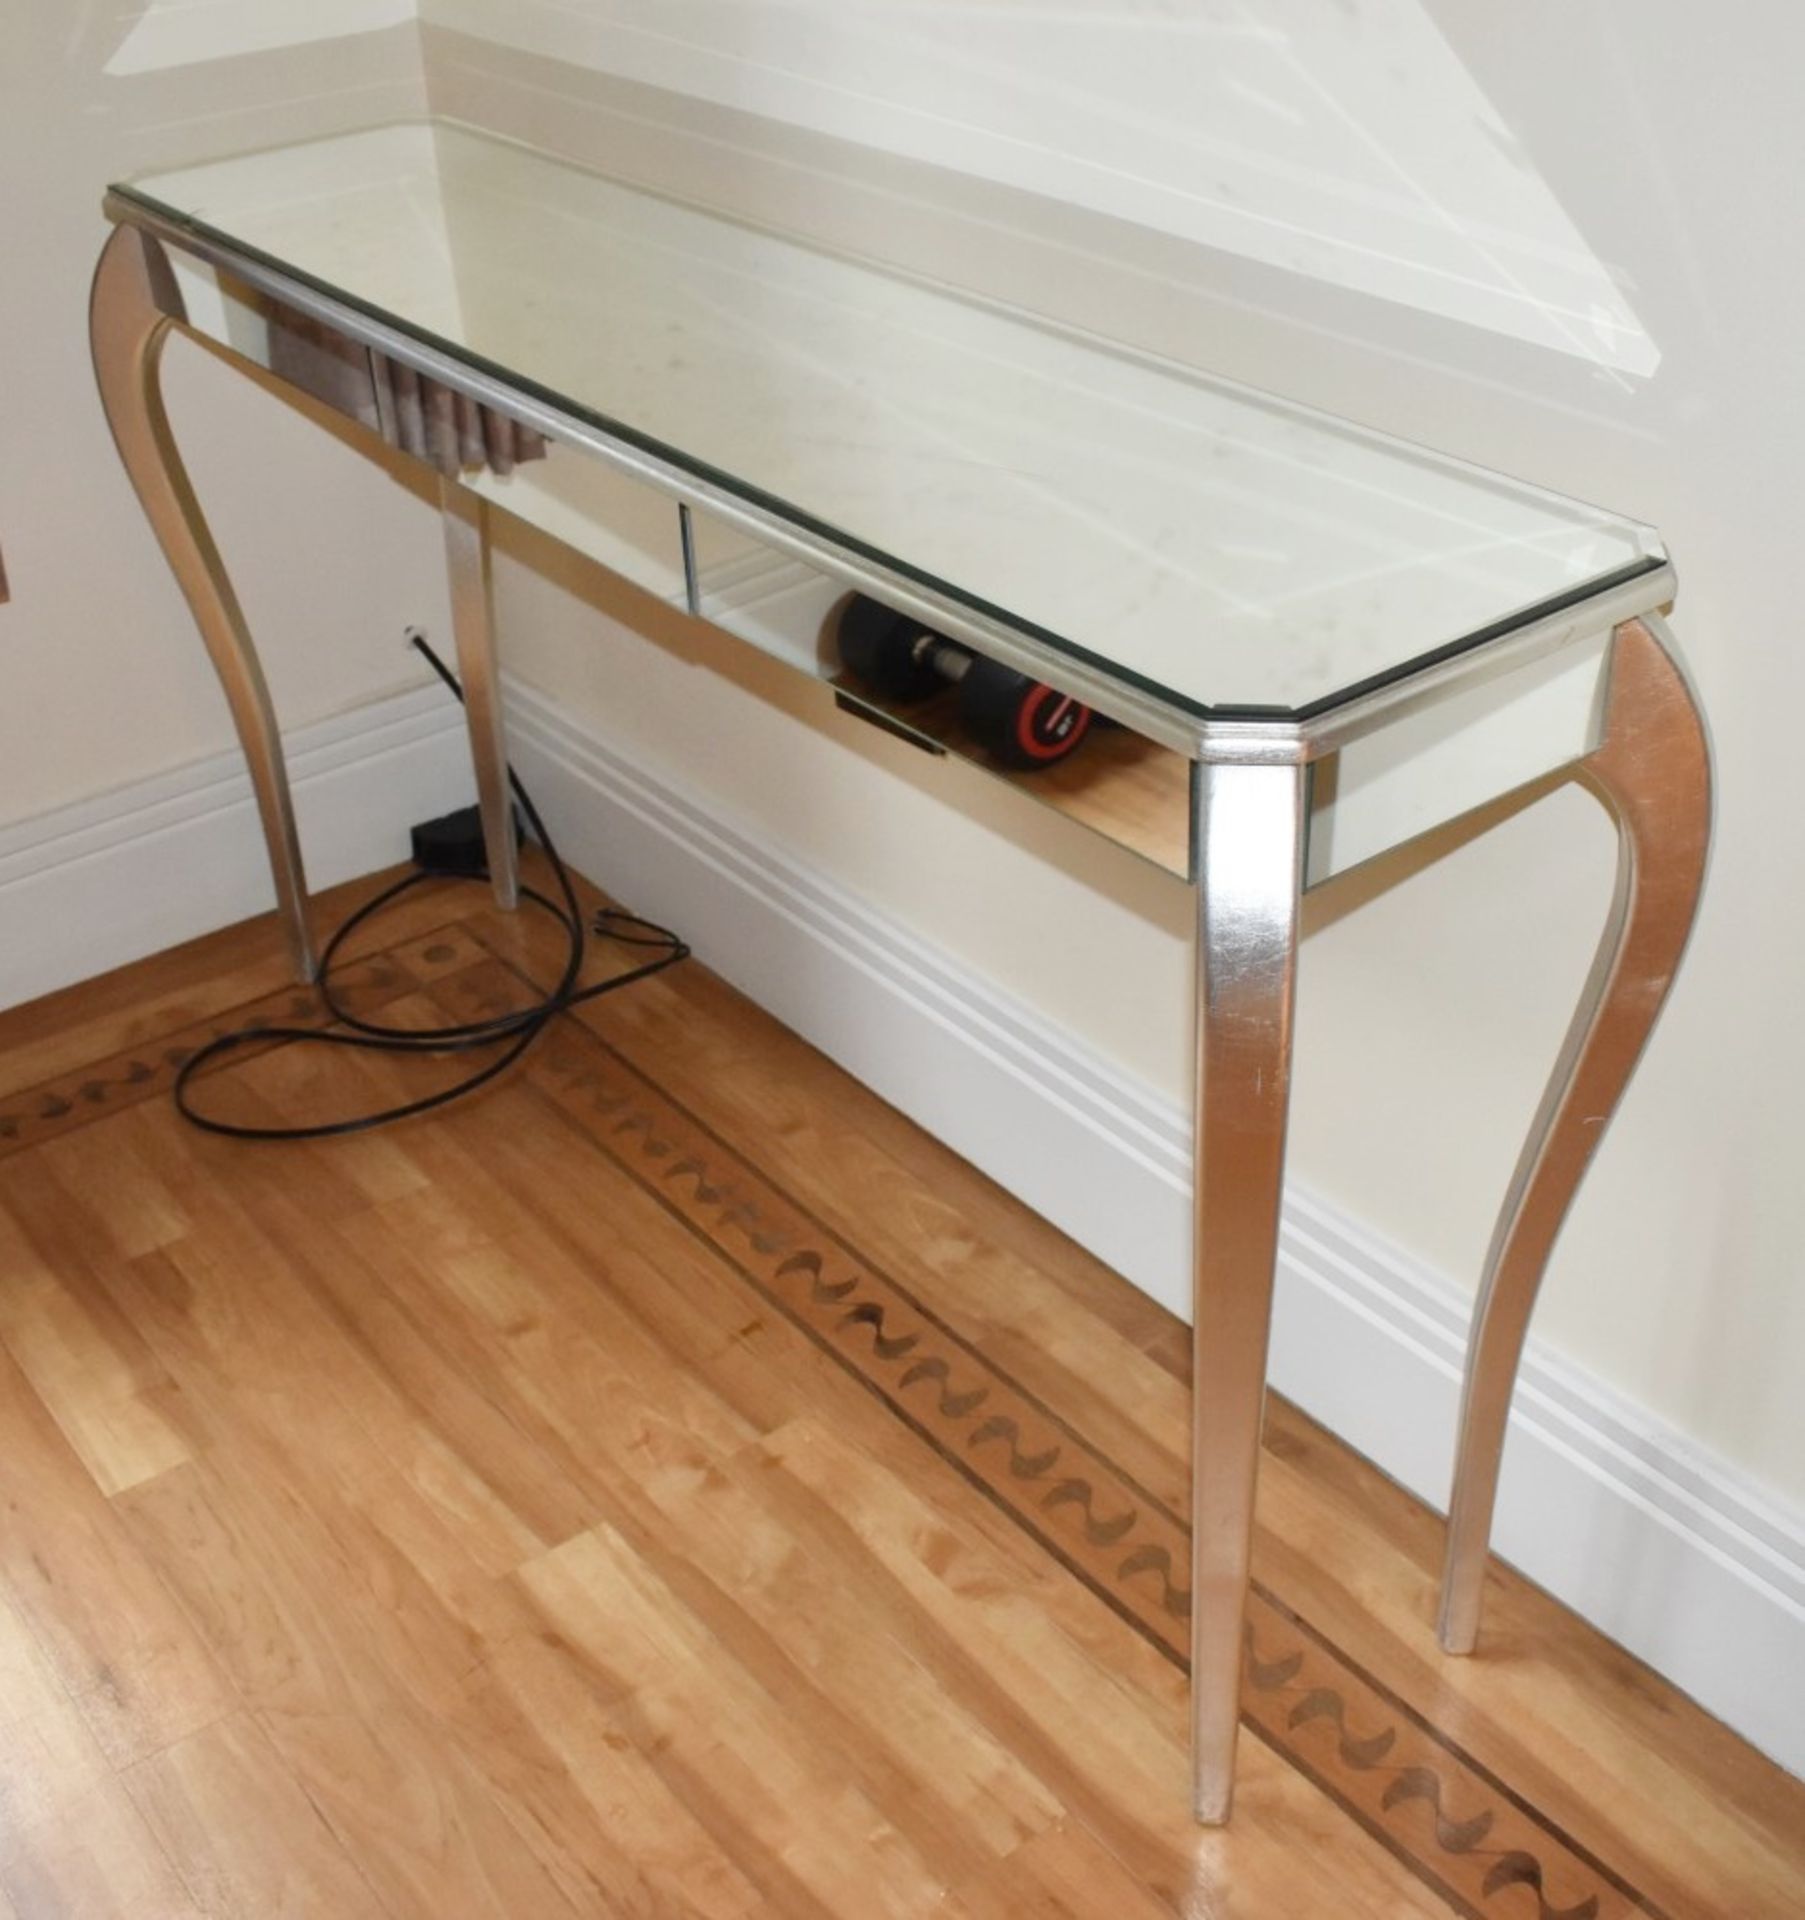 1 x Mirrored Console Table With Elegant Tapered Legs and Glass Mirror Panels - Size: H86 x W155 x - Image 2 of 5